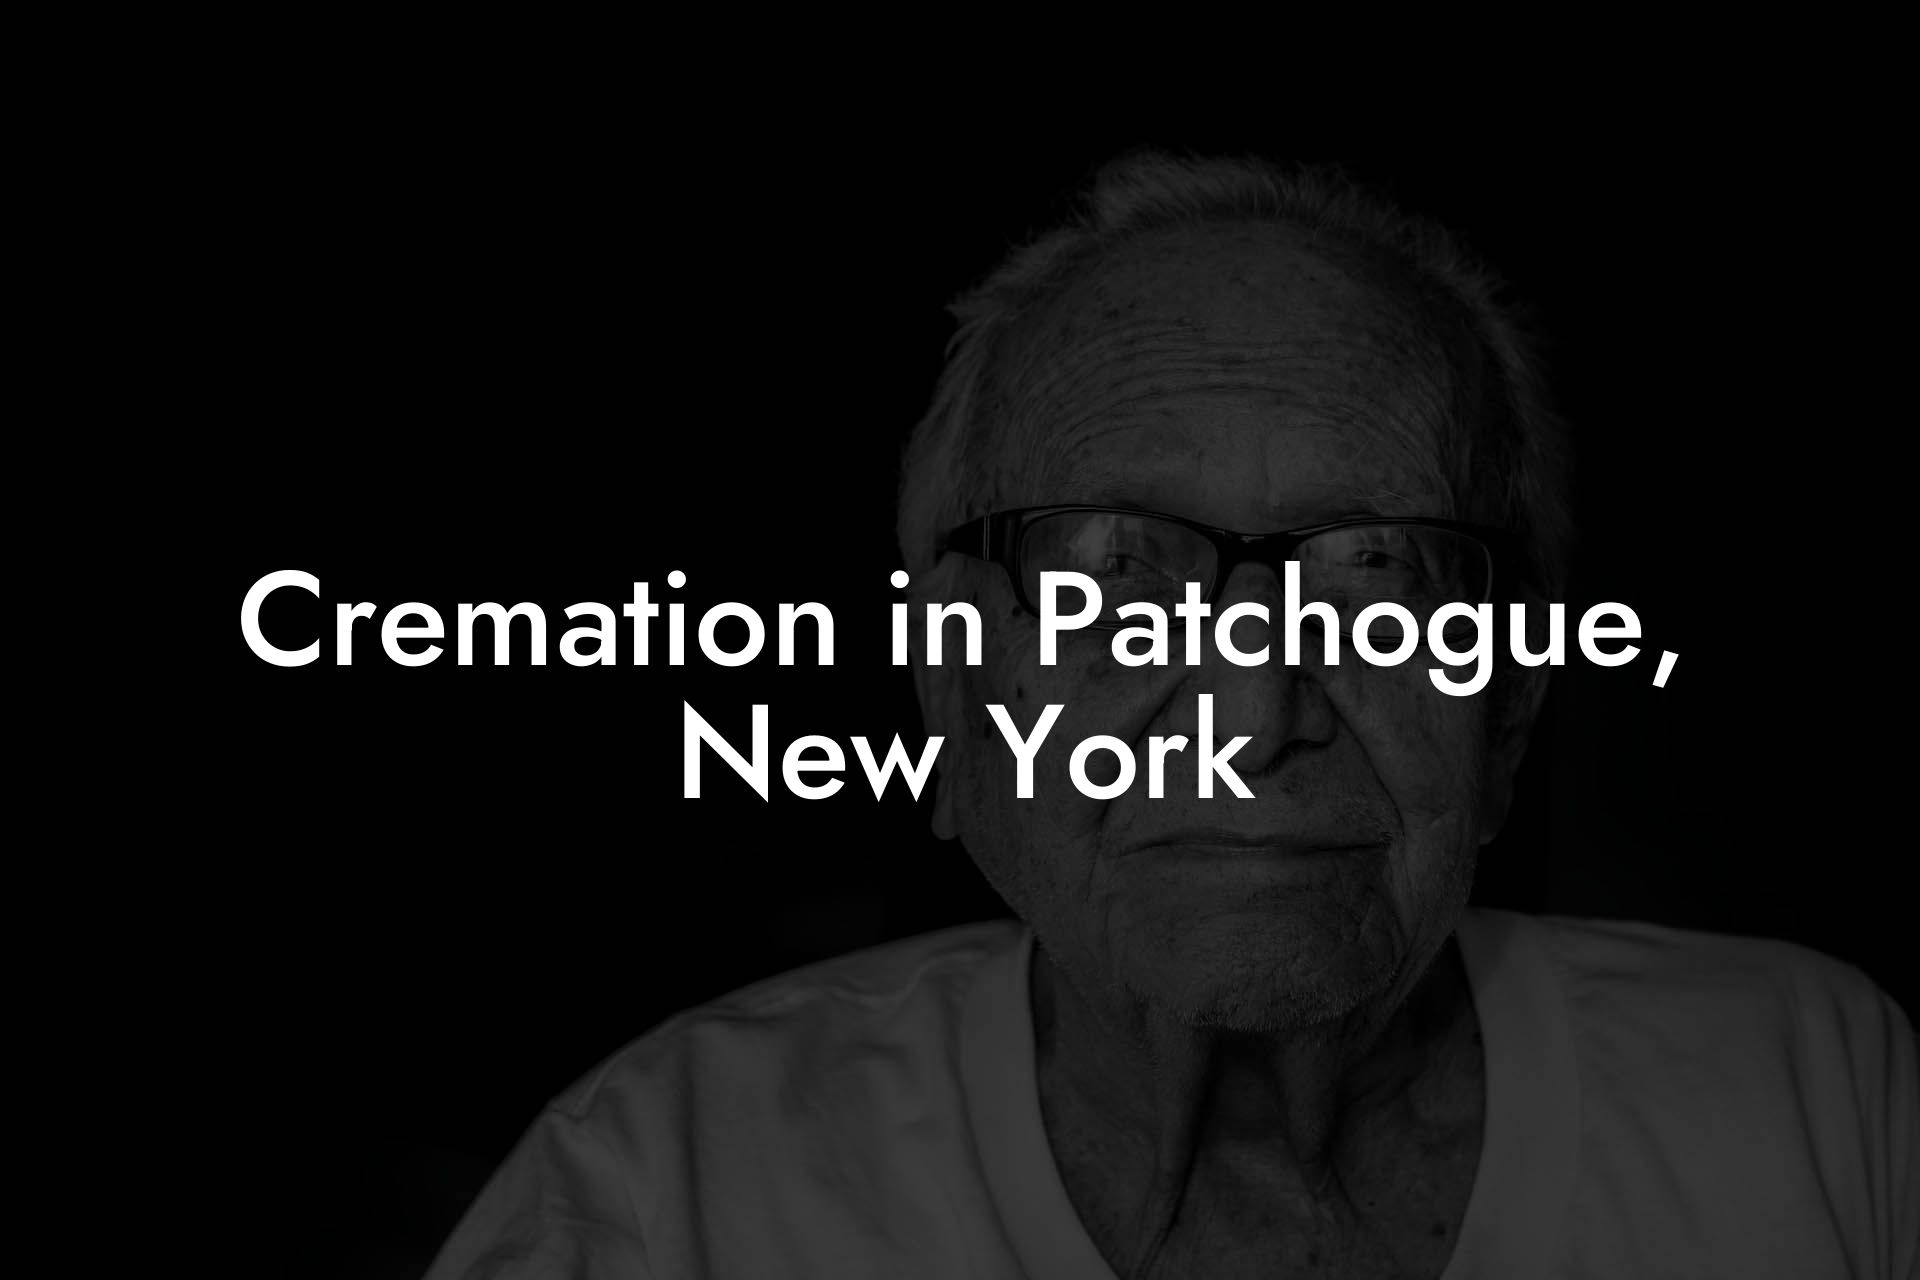 Cremation in Patchogue, New York